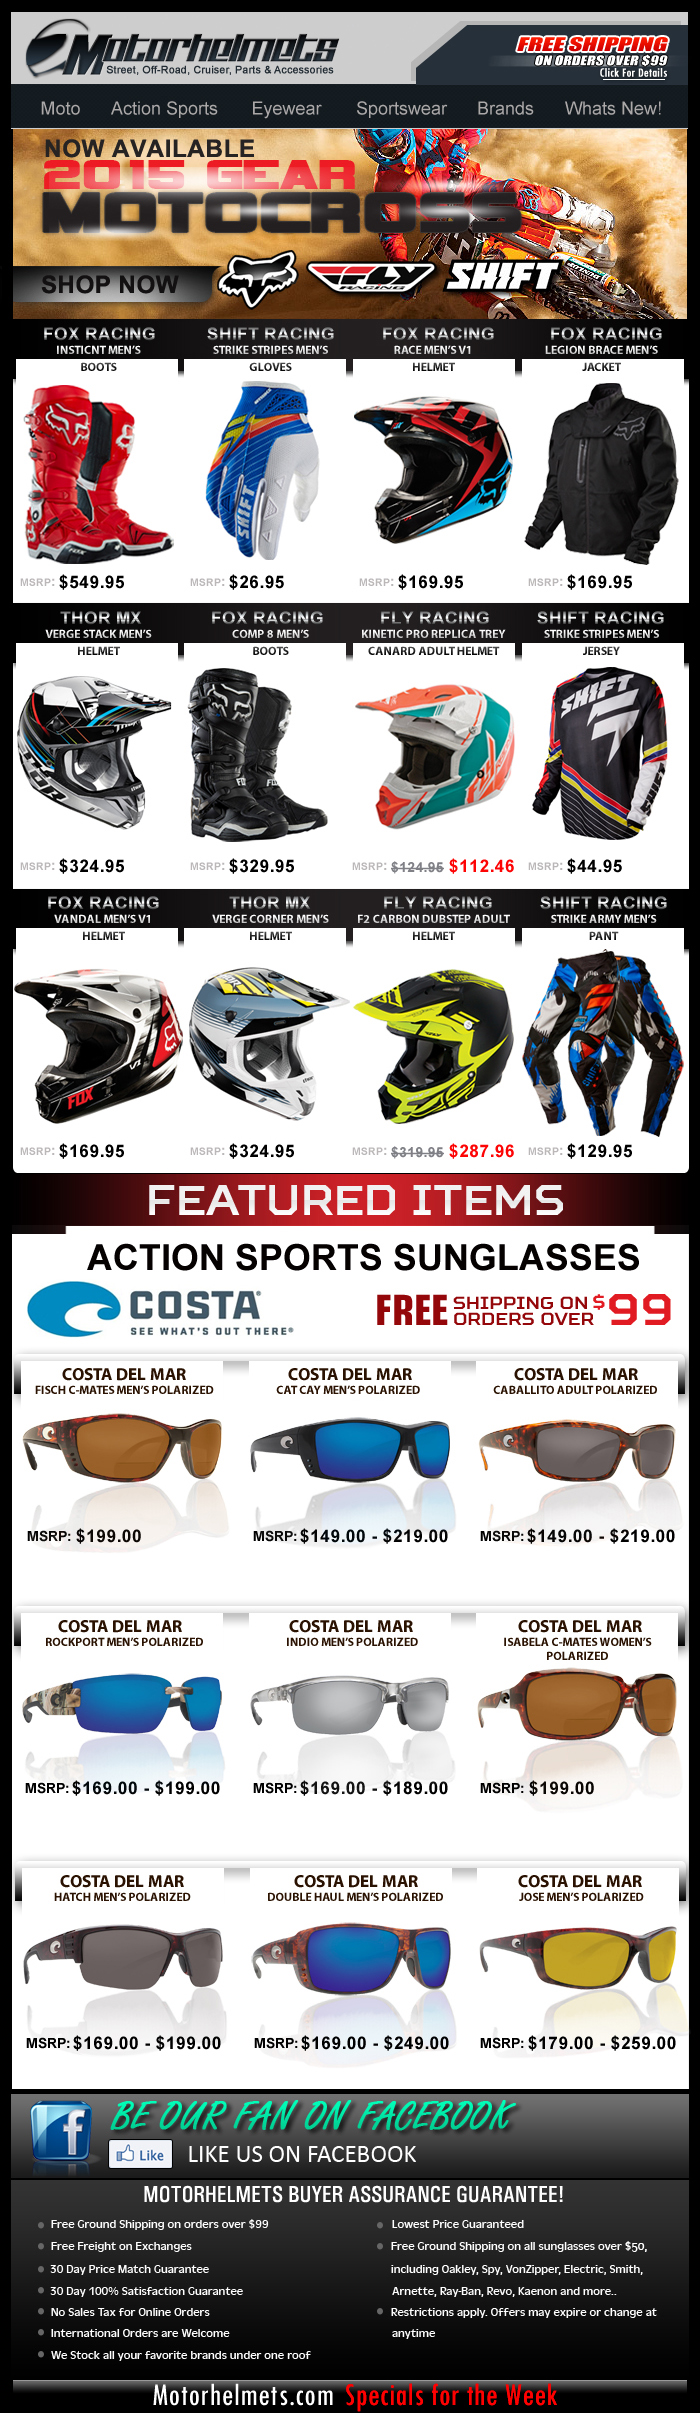 New MX Gear Arrivals from Fox, Shift, Fly Racing and more!